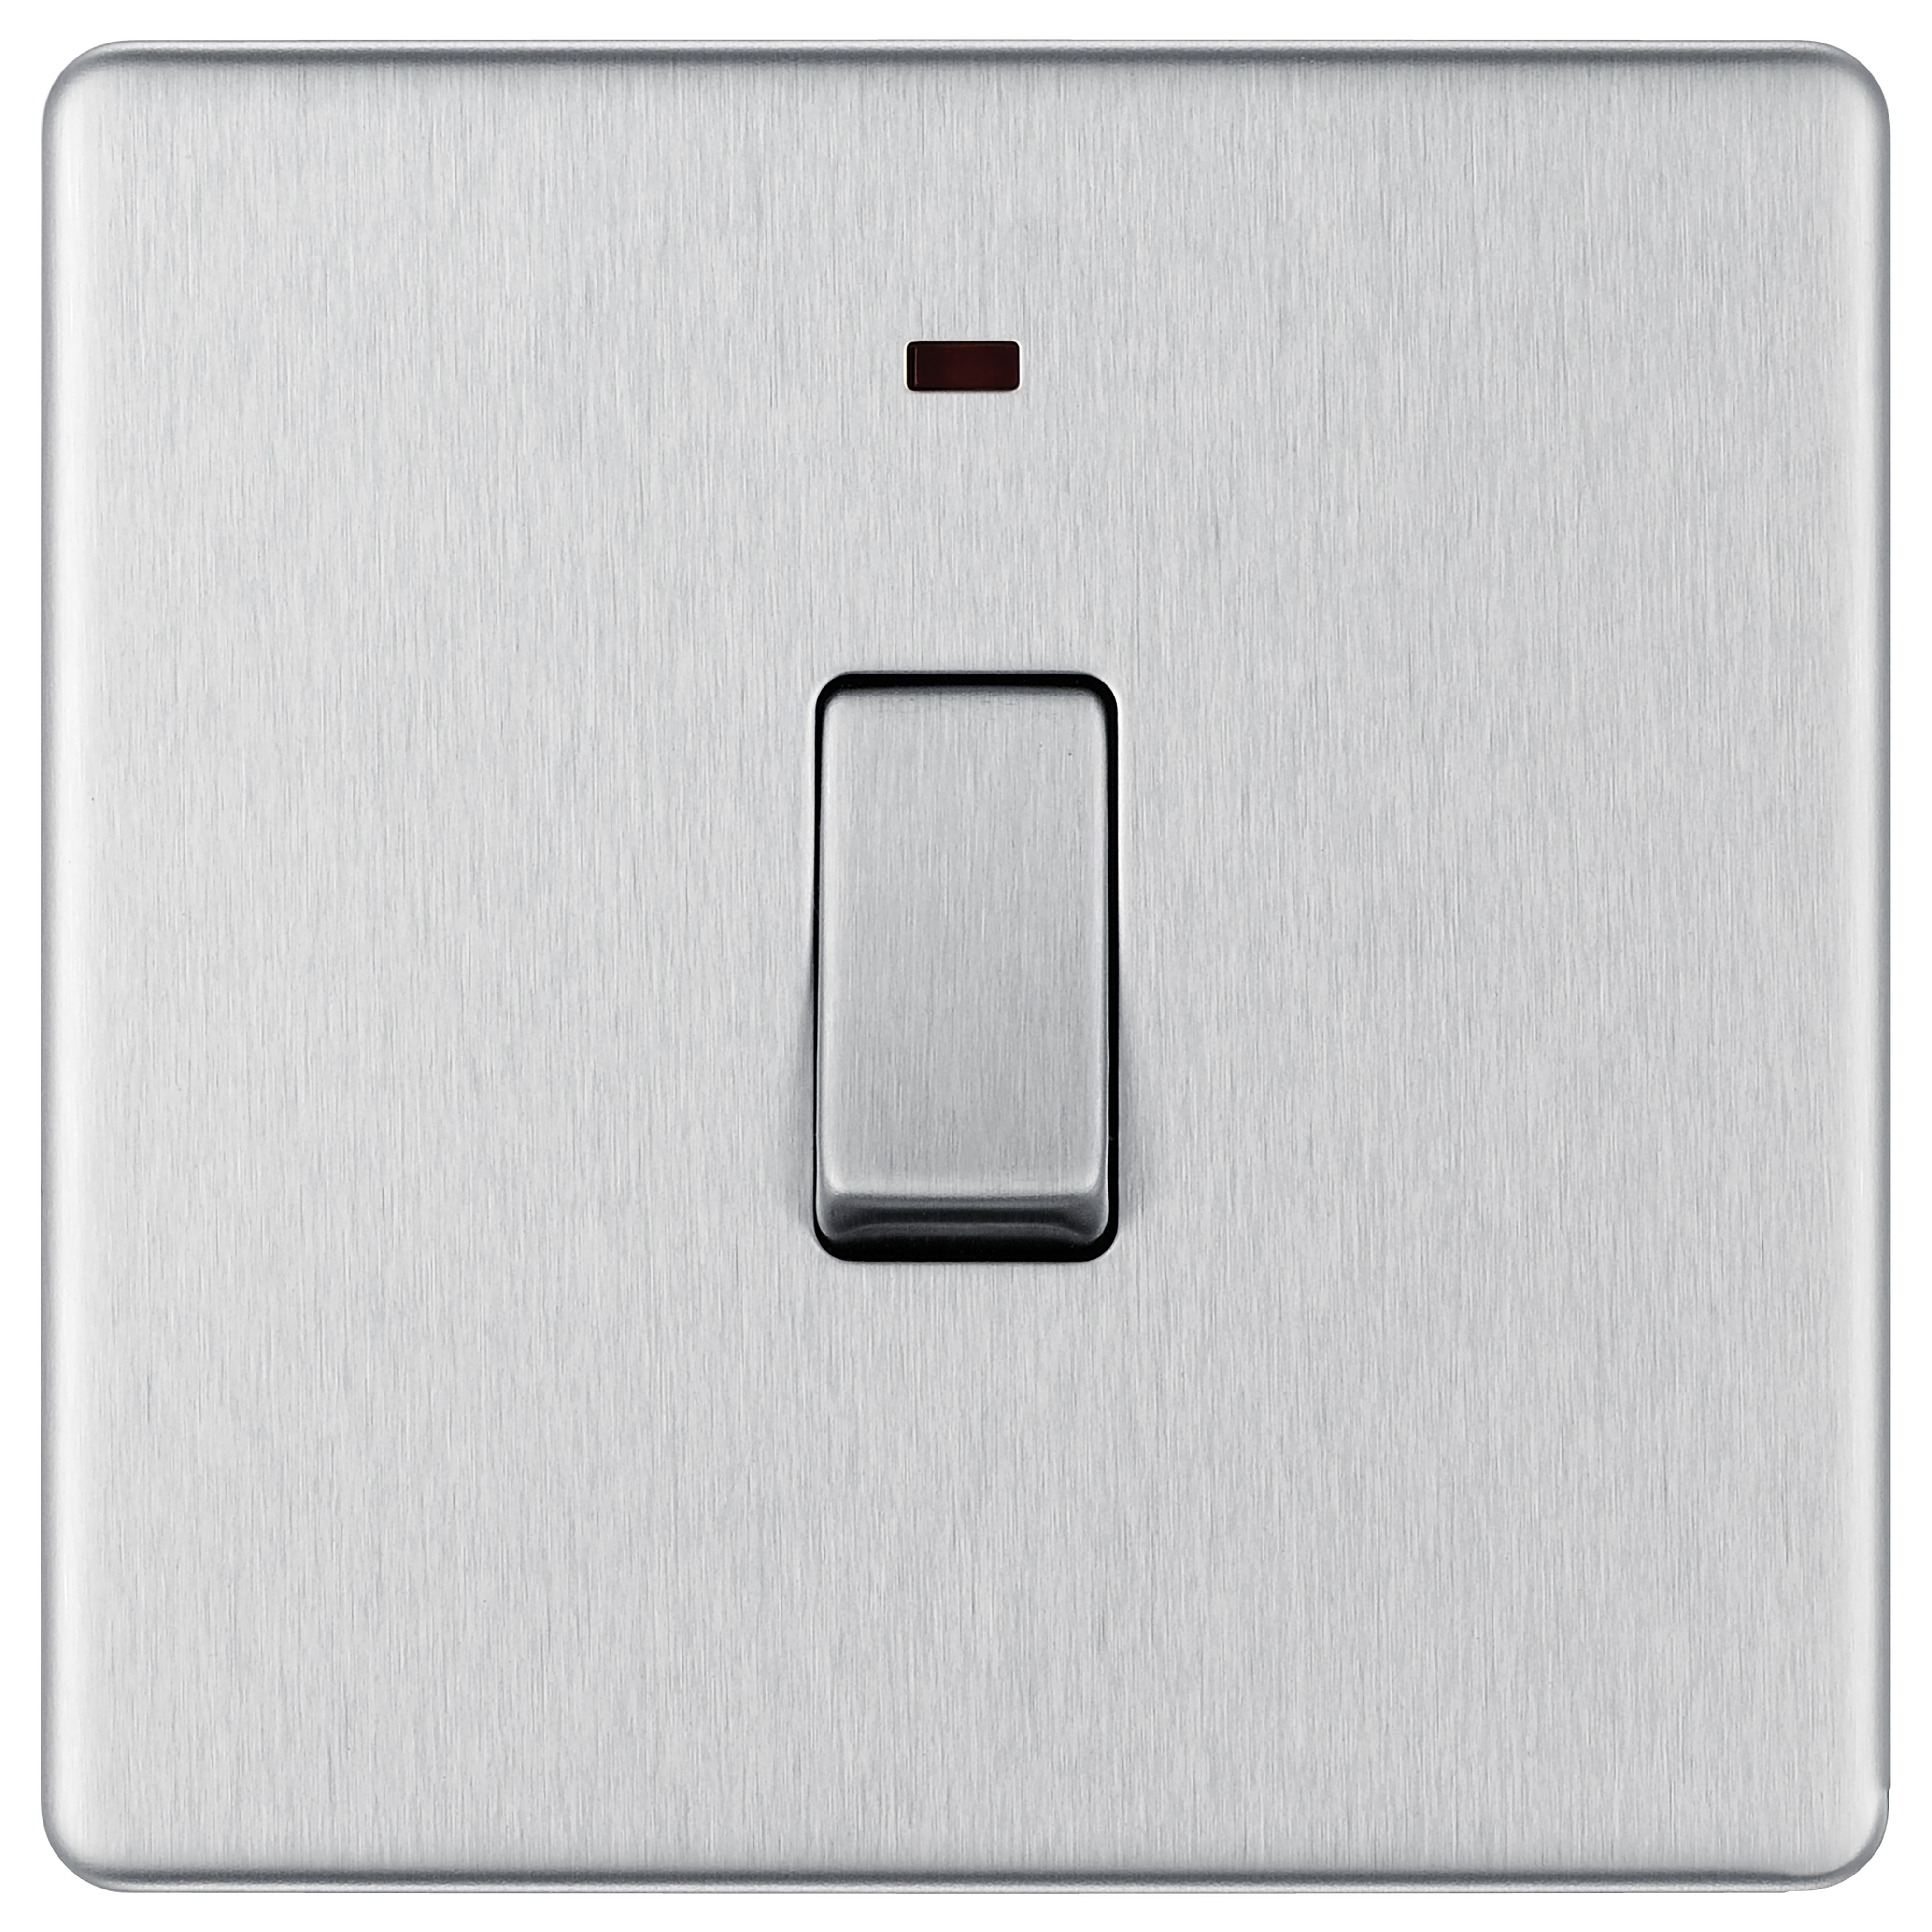 Image of BG Screwless Flatplate Brushed Steel Single Switch 20A With Power Indicator